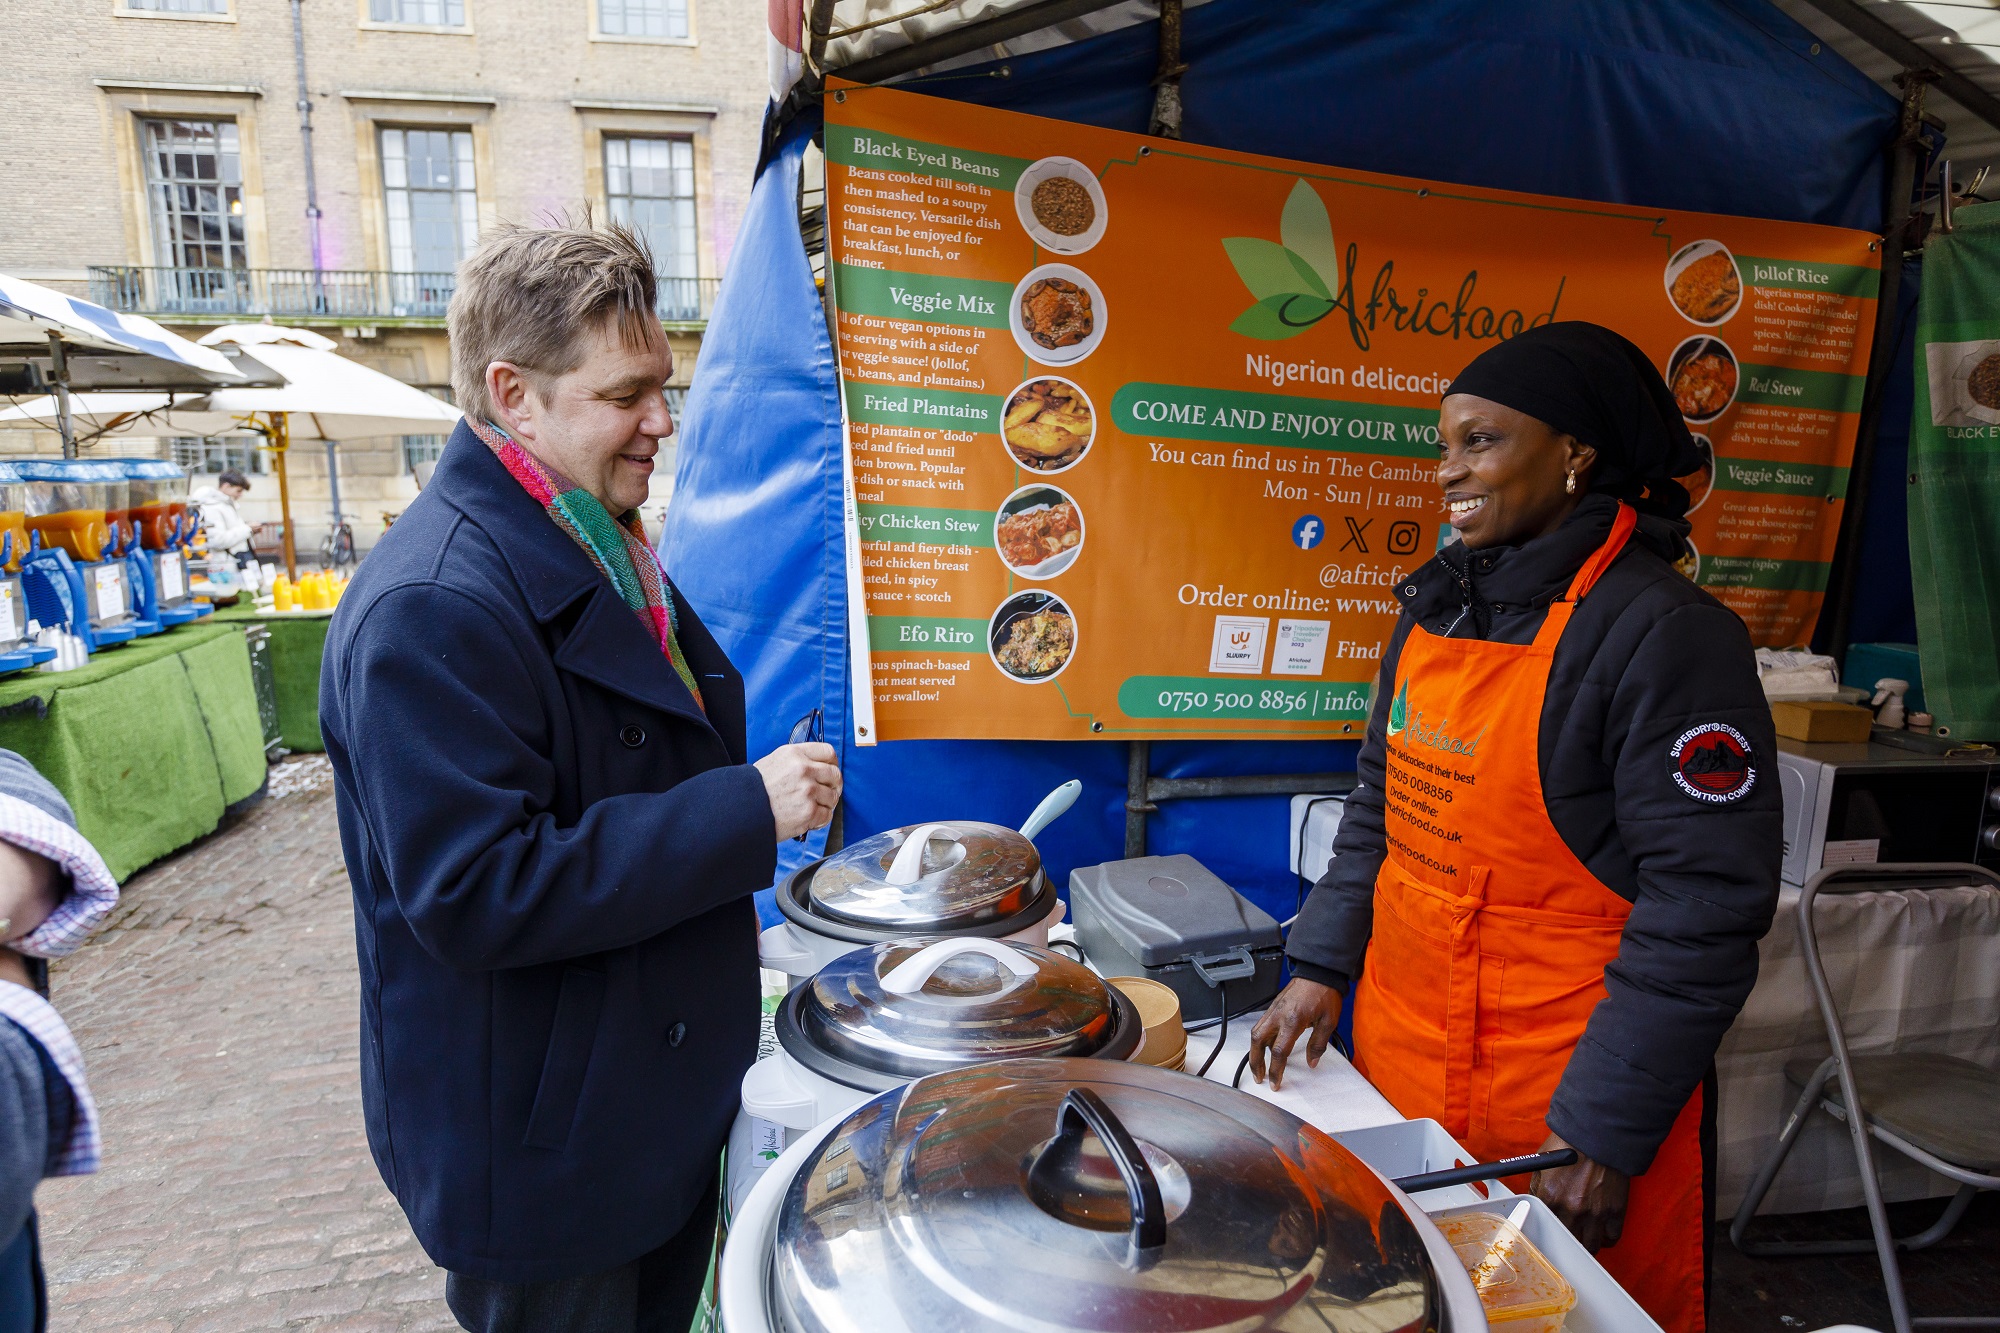 Mayor of Cambridgeshire and Peterborough left, at AfricaFood stall on Cambridge Market Square